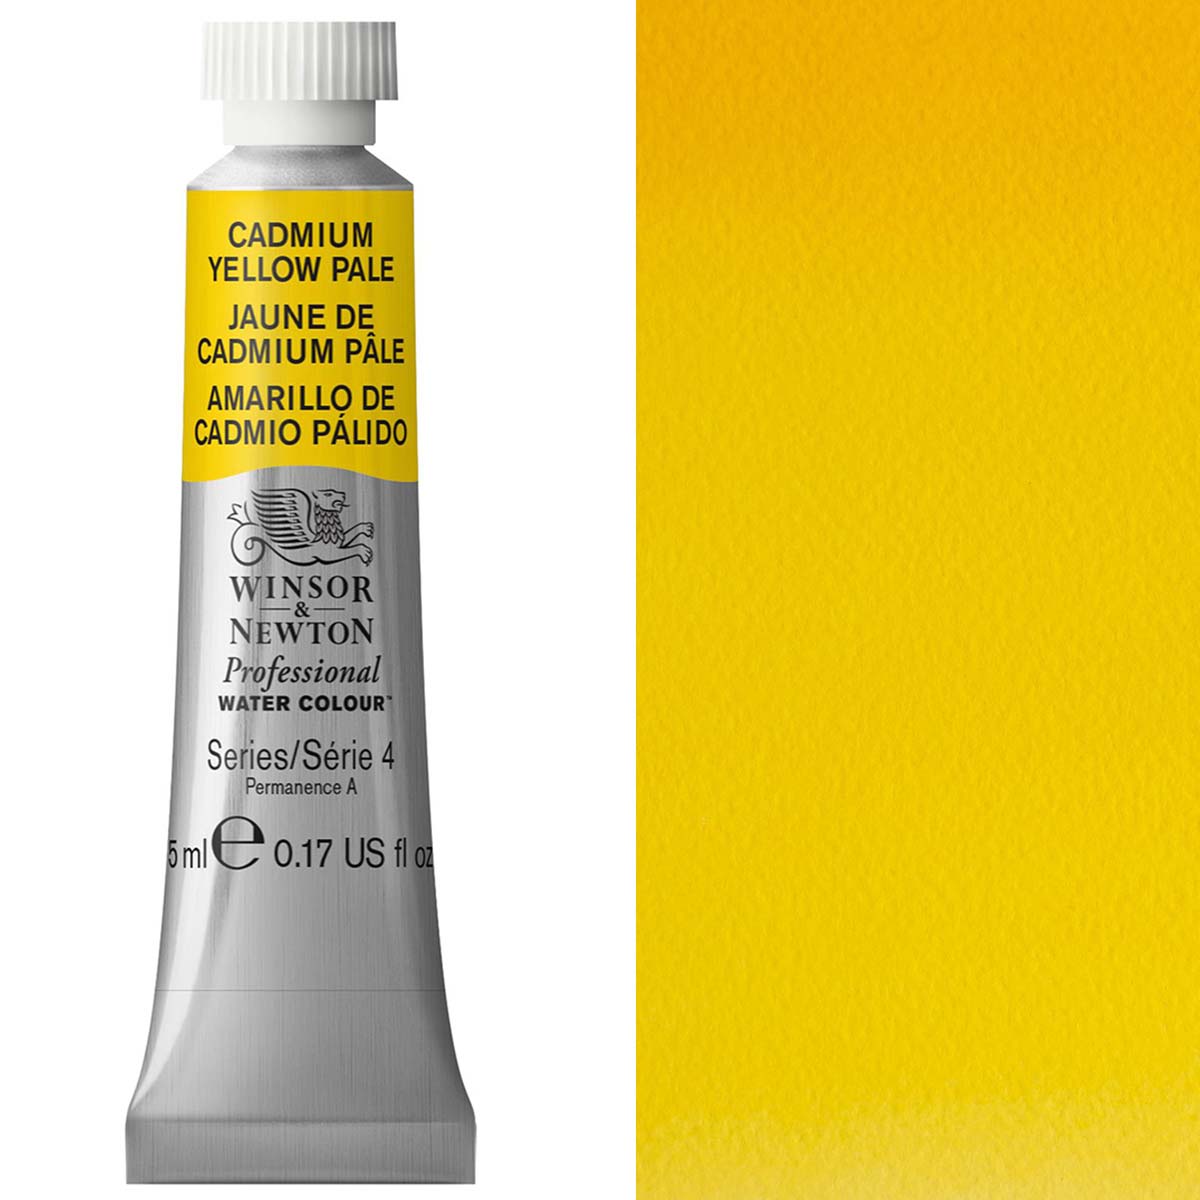 Winsor and Newton - Professional Artists' Watercolour - 5ml - Cadmium Yellow Pale